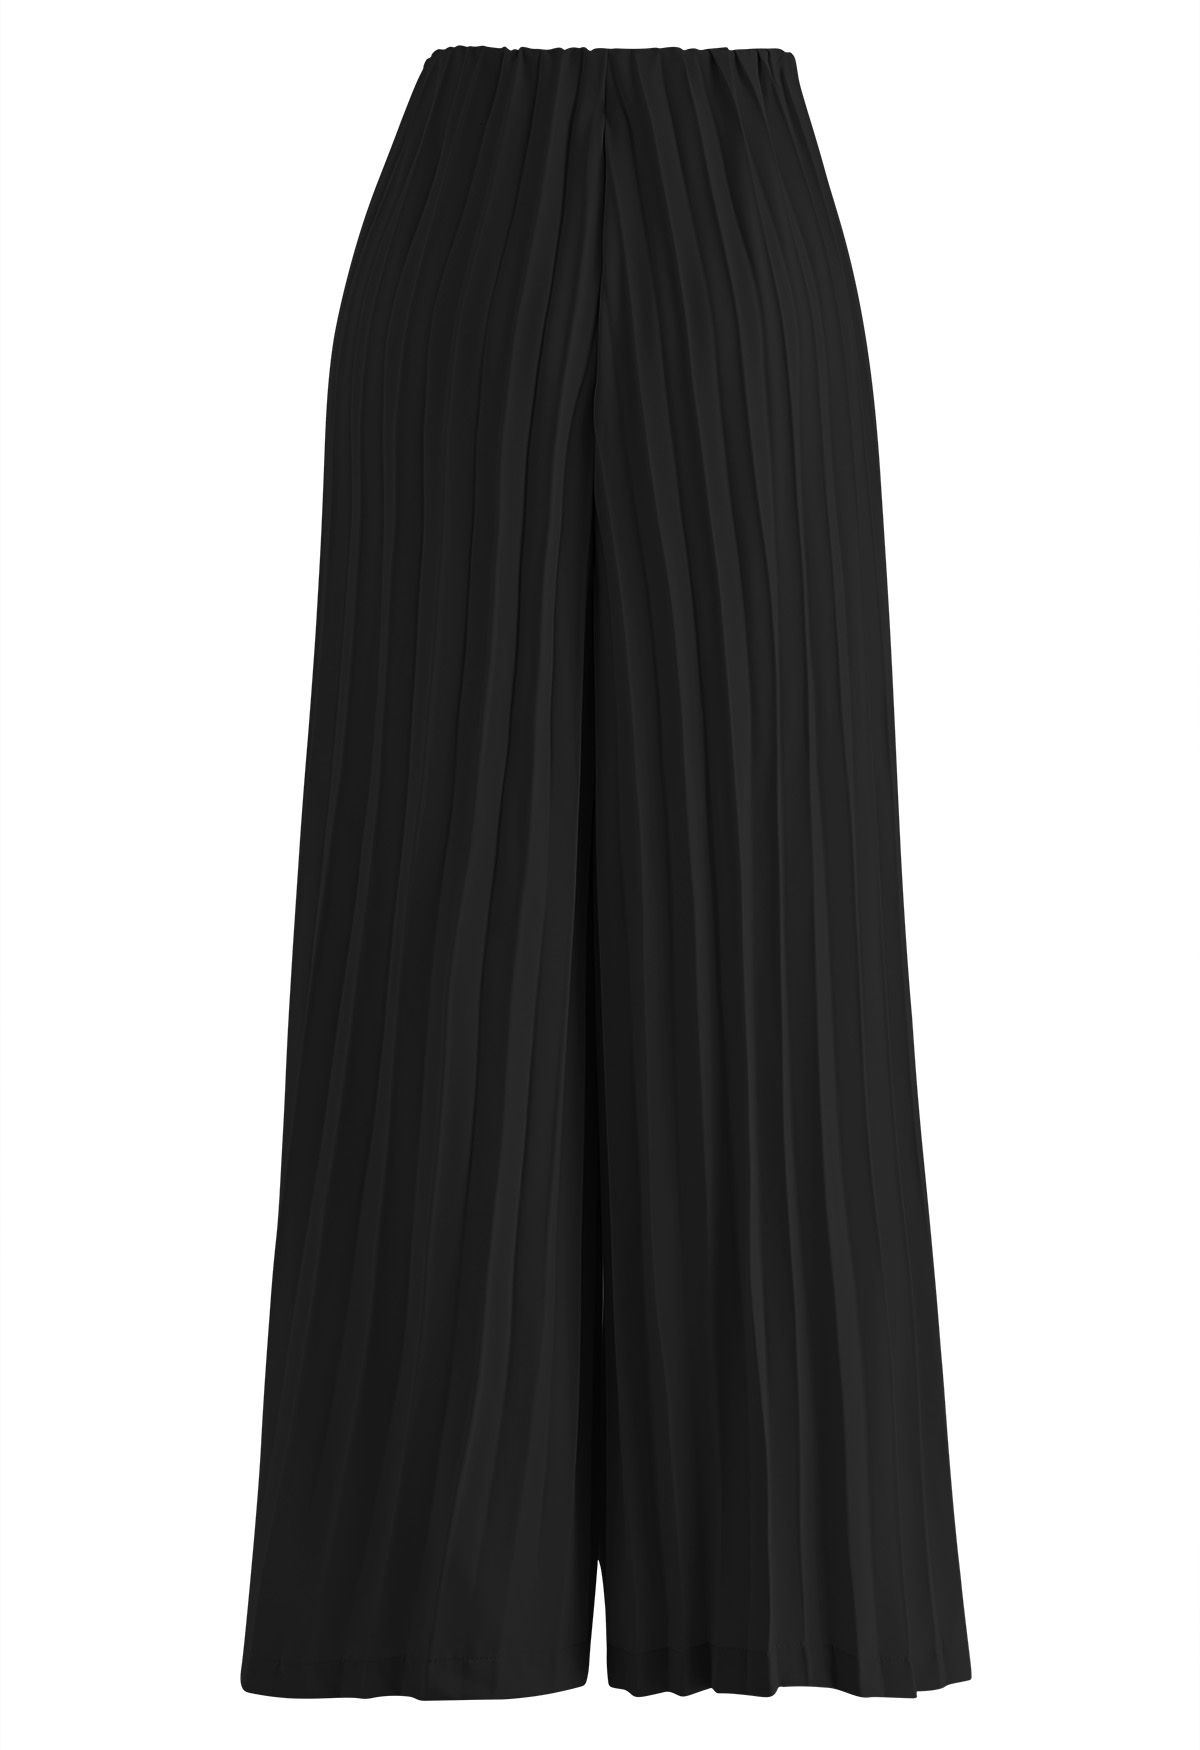 Full Pleated Wide-Leg Pants in Black - Retro, Indie and Unique Fashion